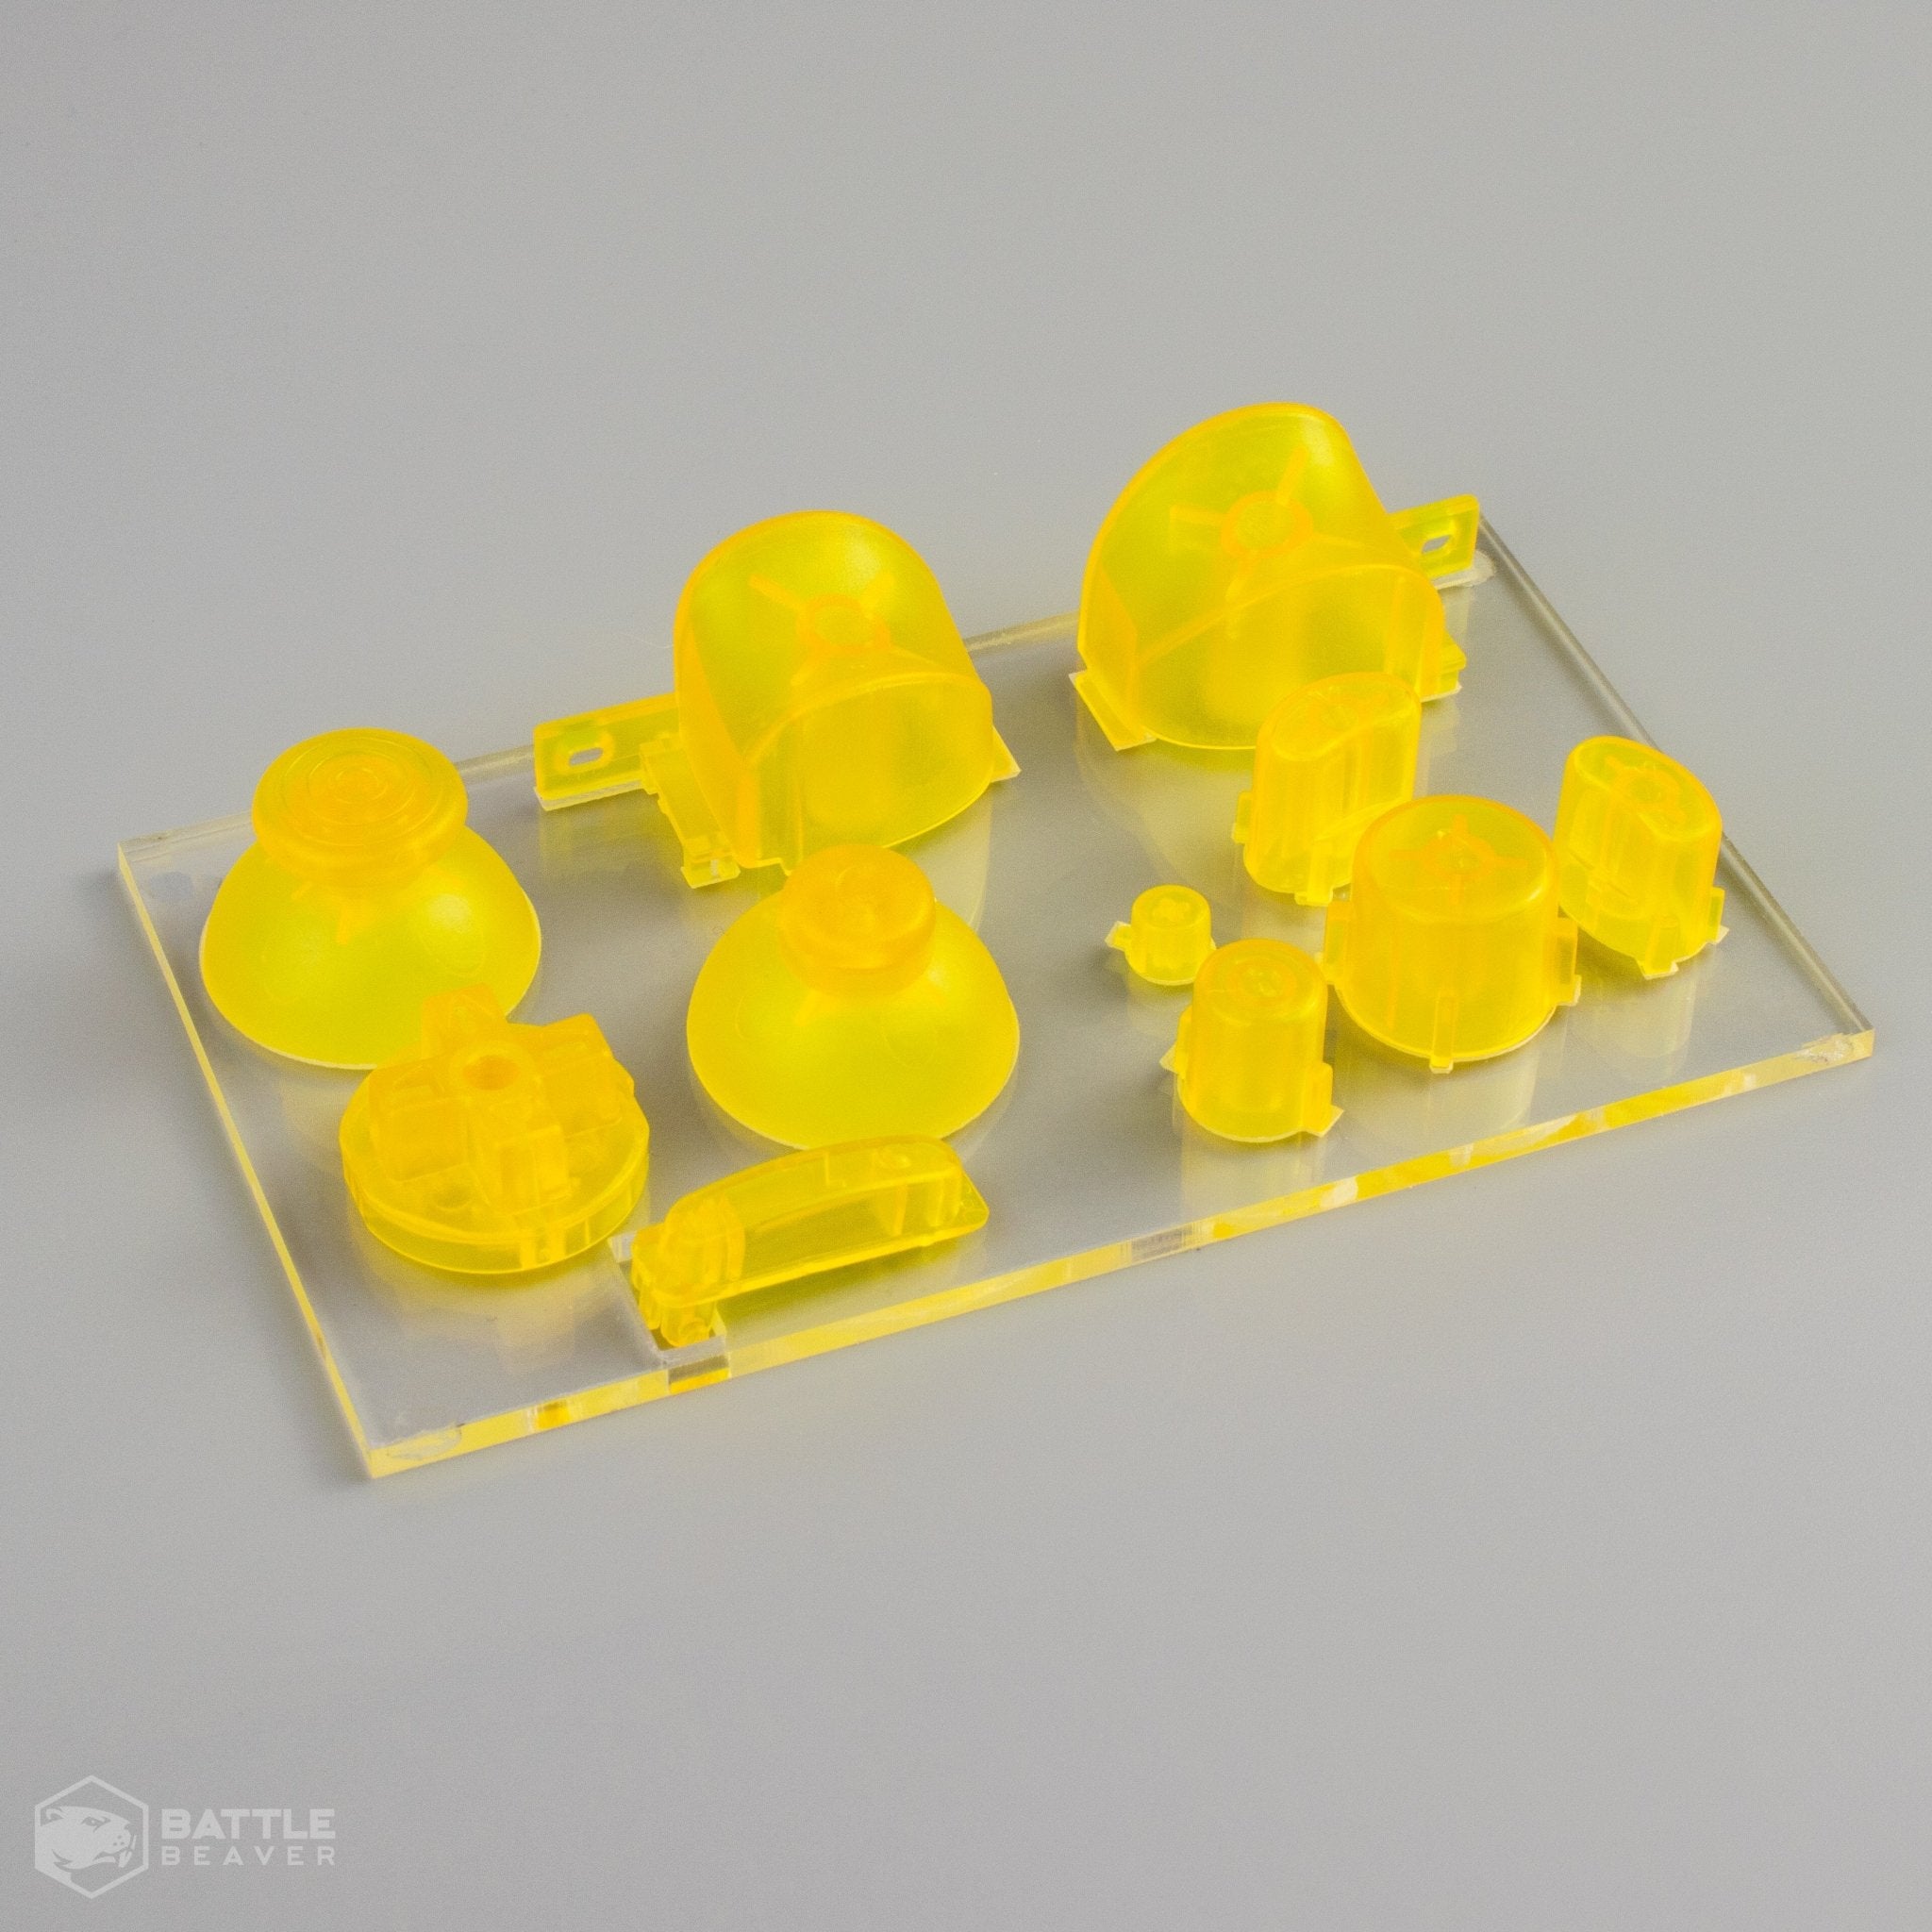 3rd Party Gamecube Parts Kit - Battle Beaver Customs - Crystal Yellow